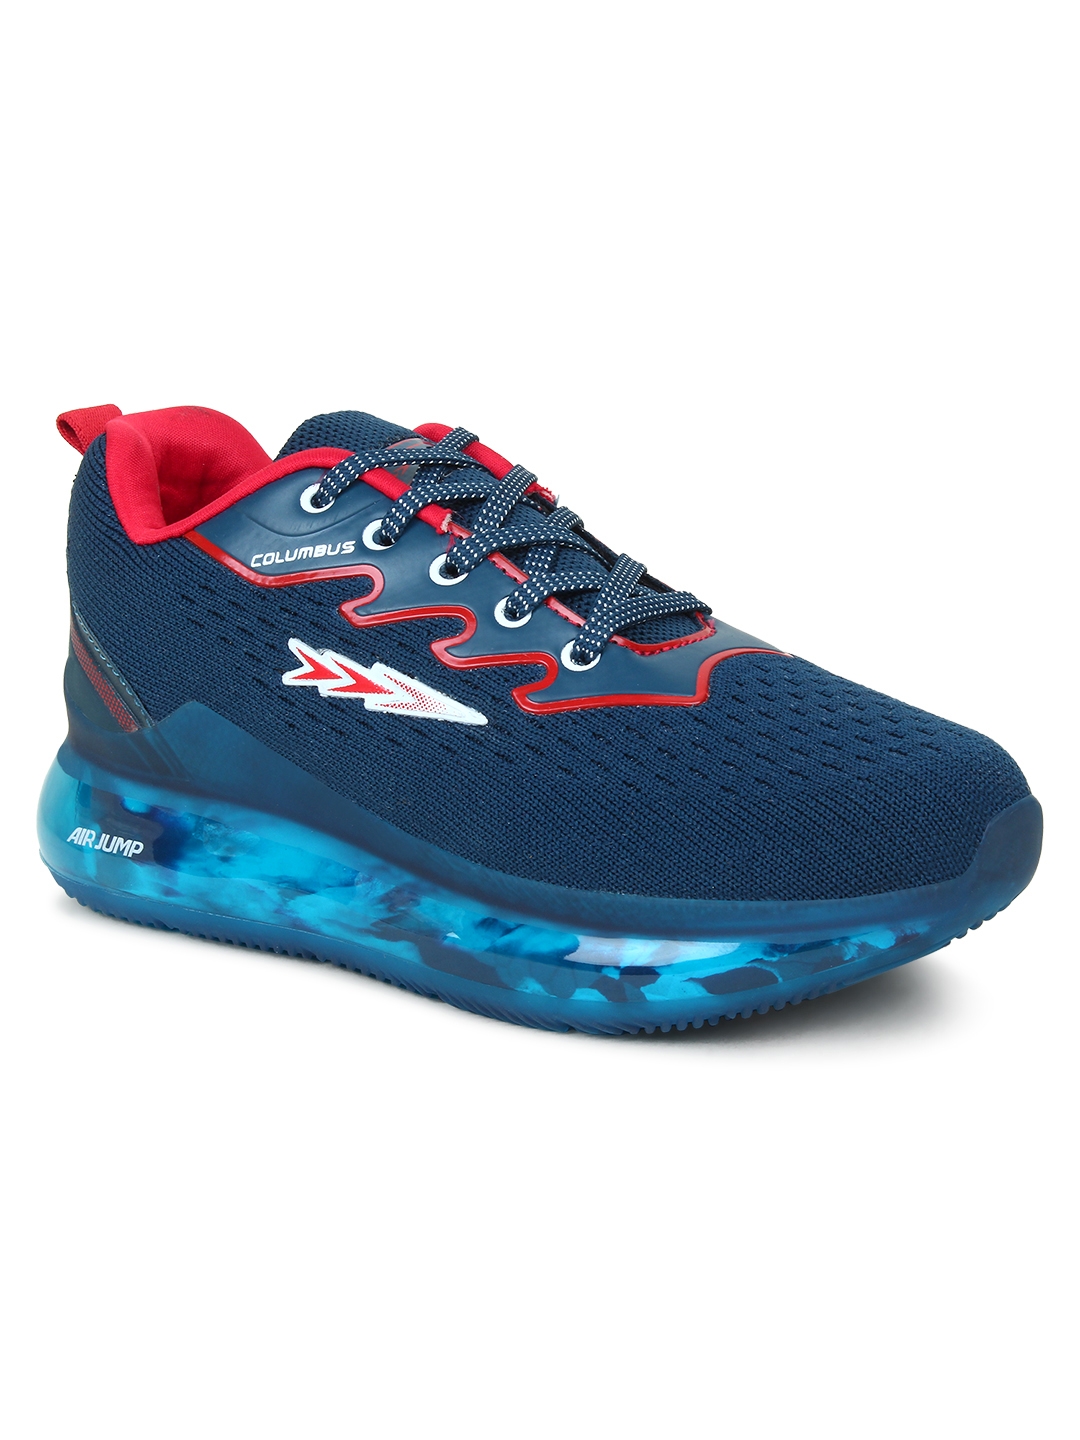 Columbus Shoes | Columbus ELEVATE-T.BLUE RED Running Shoes For Boys